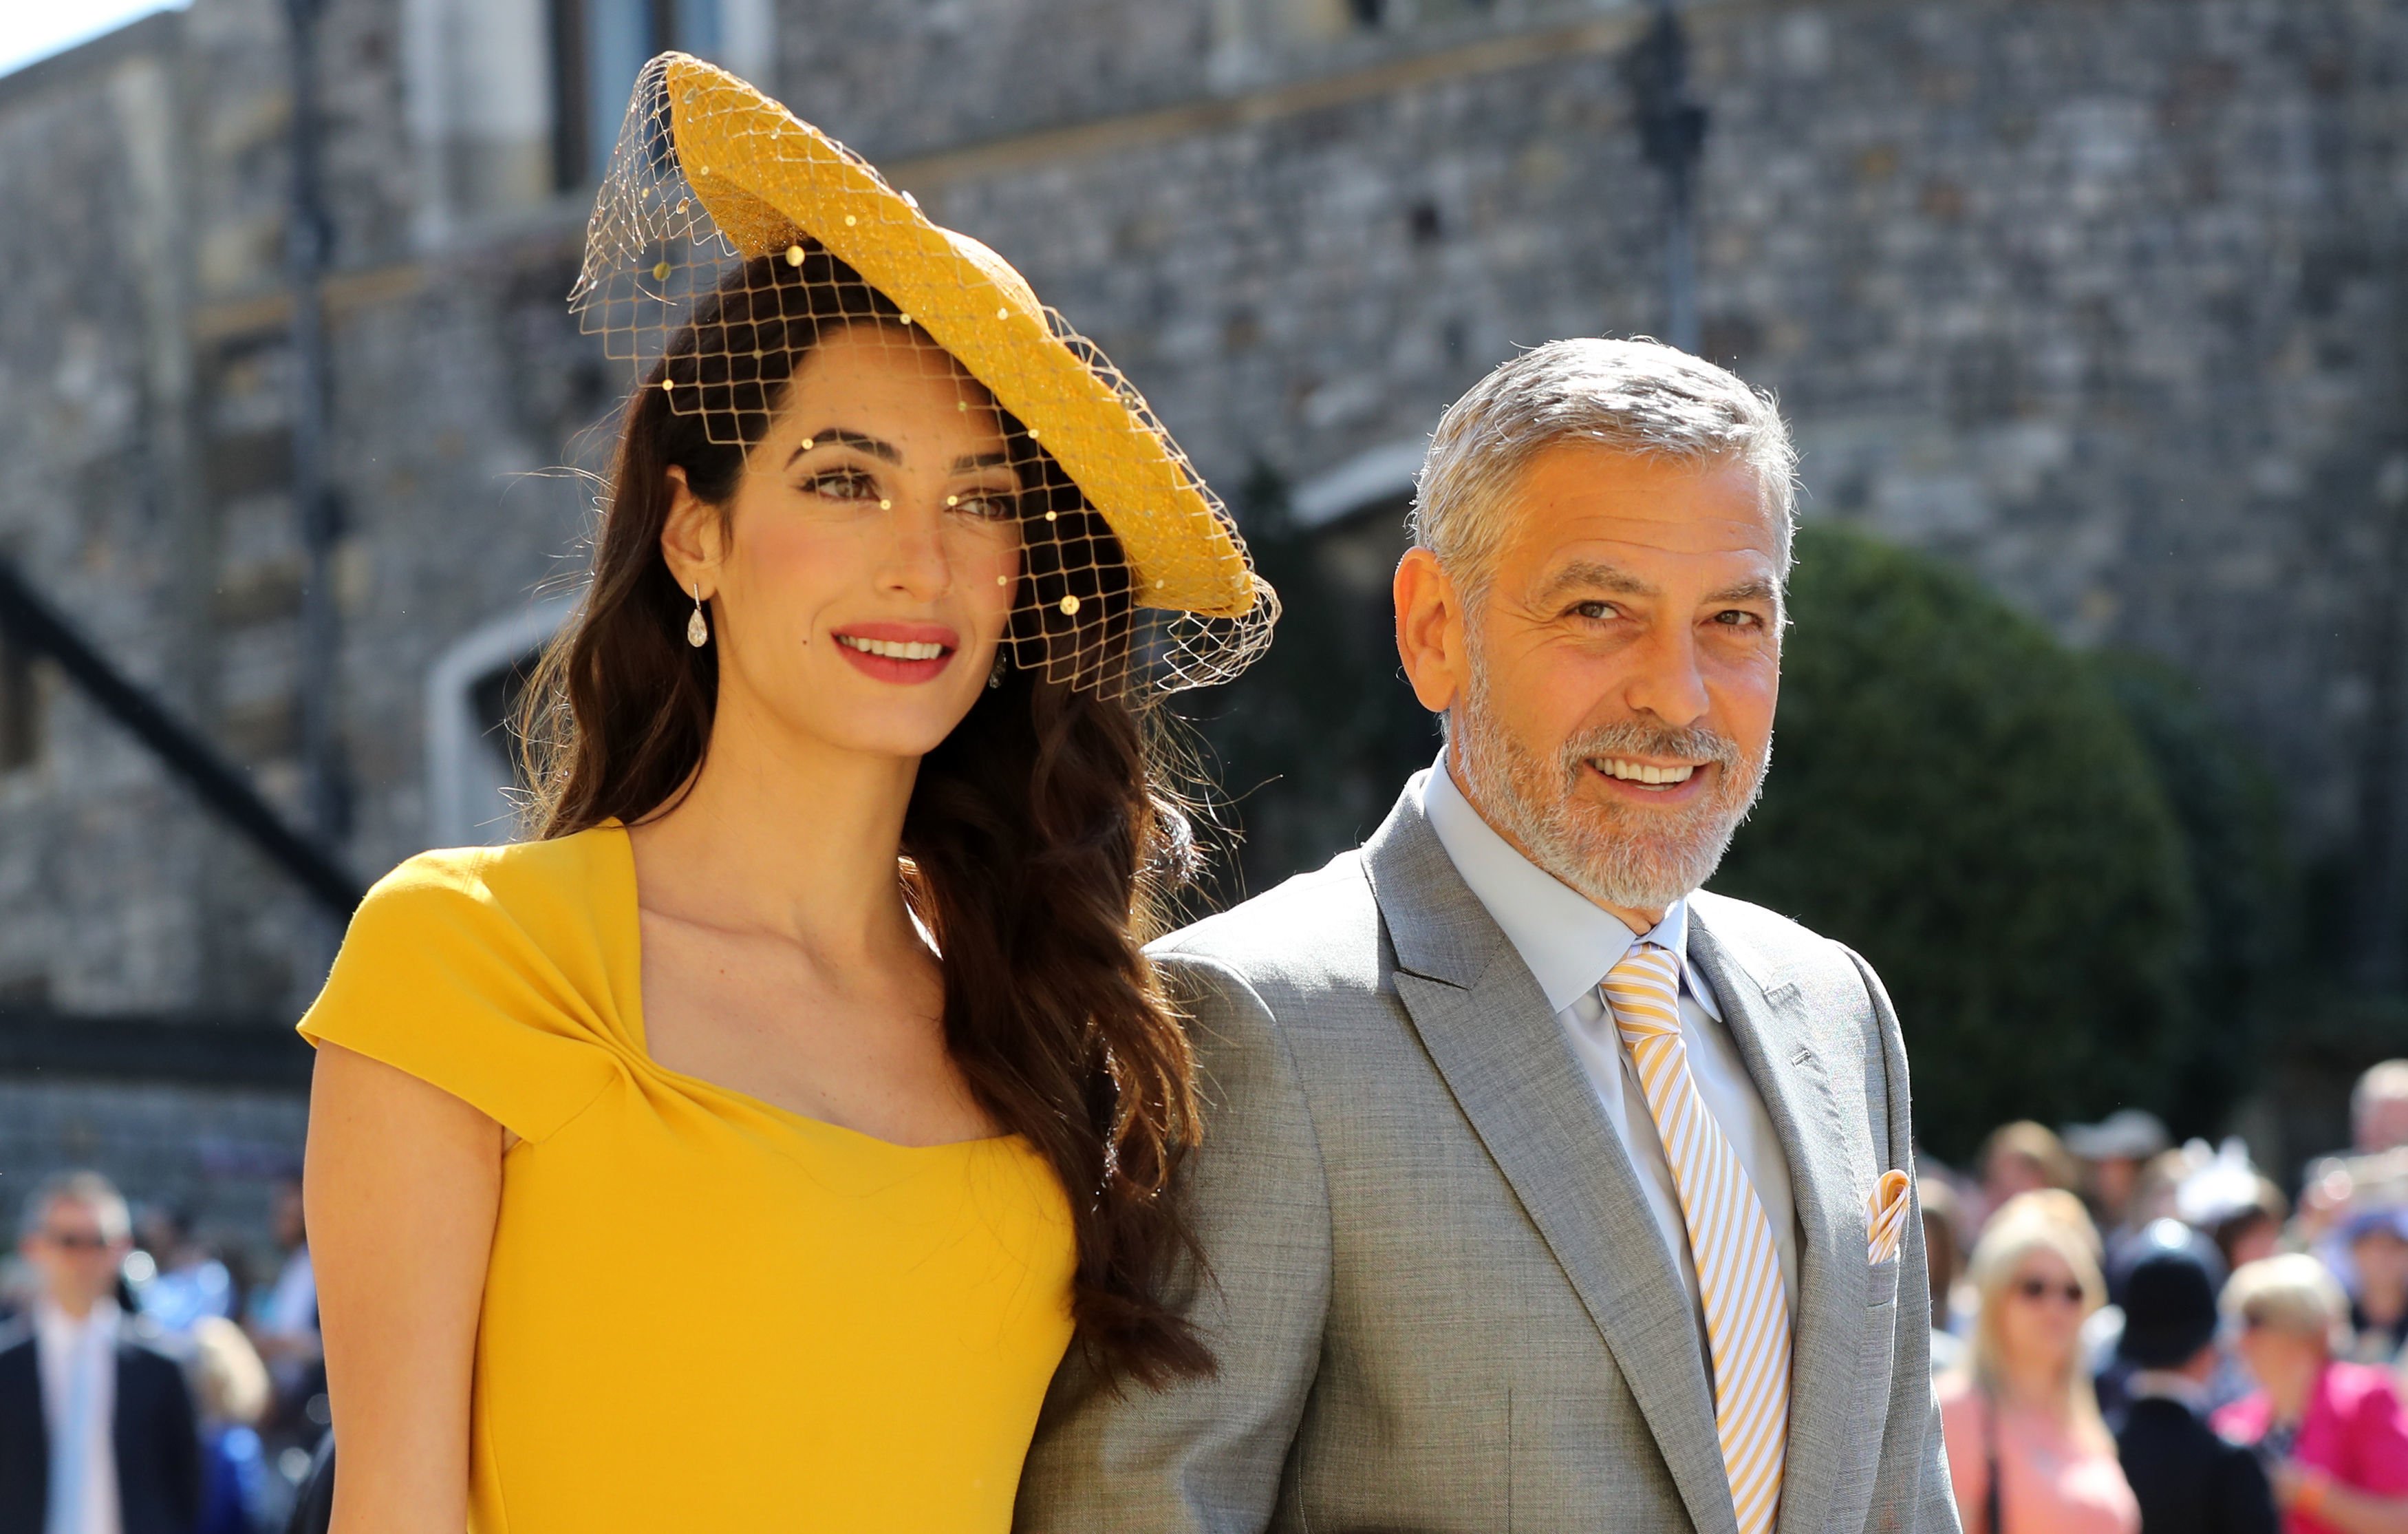 Amal Clooney and George Clooney at the wedding ceremony of Britain's Prince Harry, Duke of Sussex and Meghan Markle at St George's Chapel, Windsor Castle, in Windsor, on May 19, 2018 | Source: Getty Images